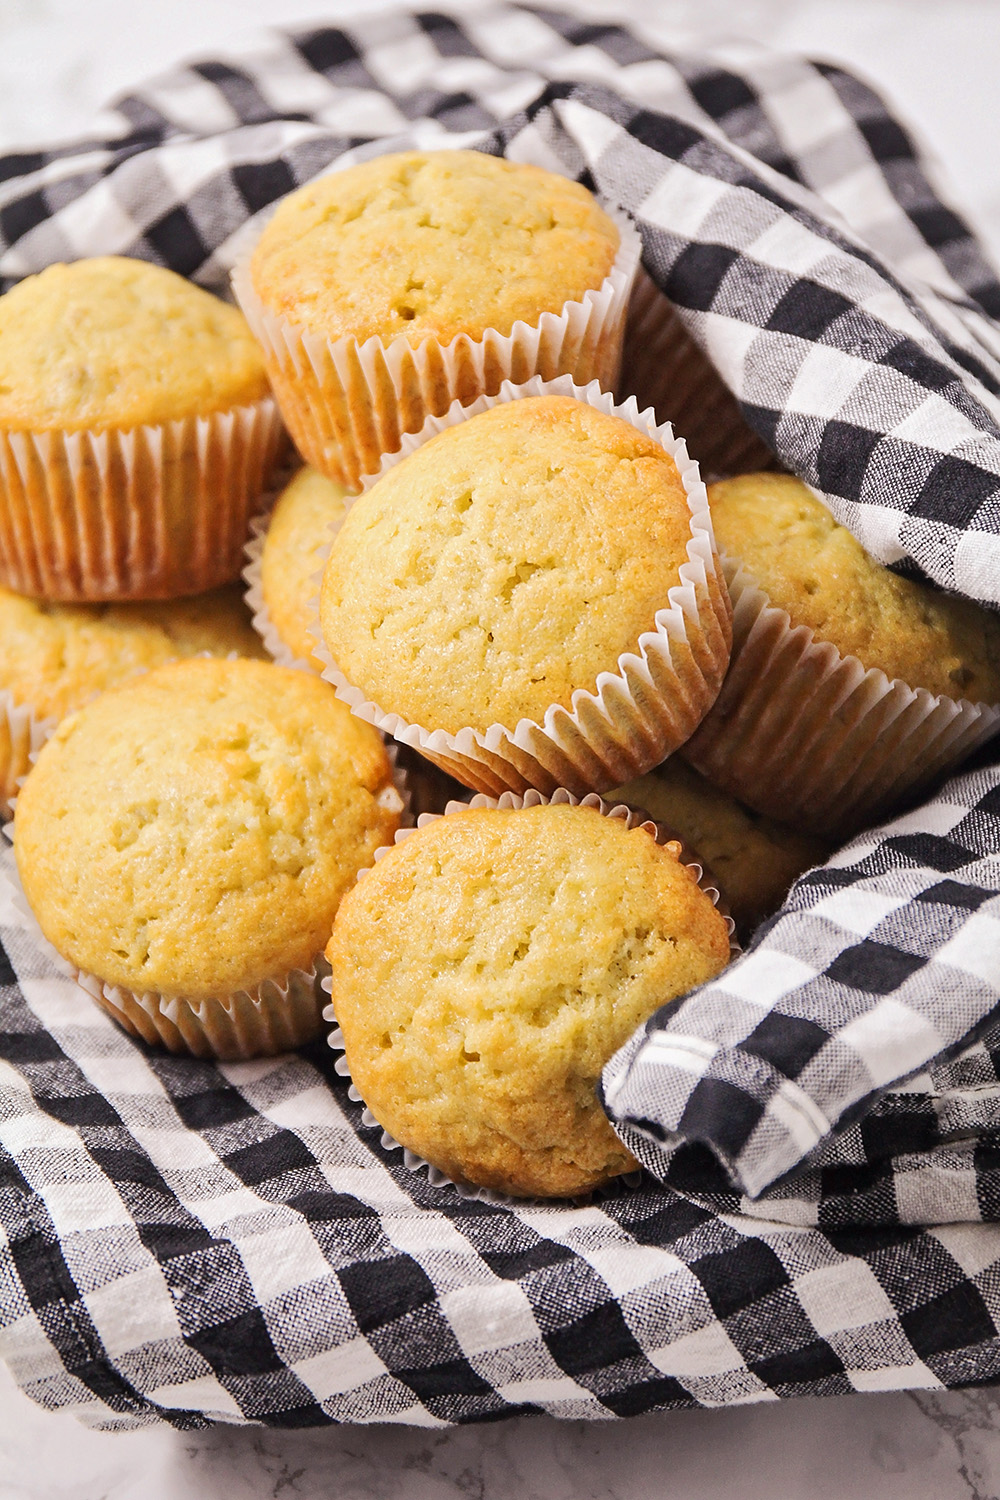 These tender and sweet banana bread muffins have the BEST banana flavor, and they're so easy to make!